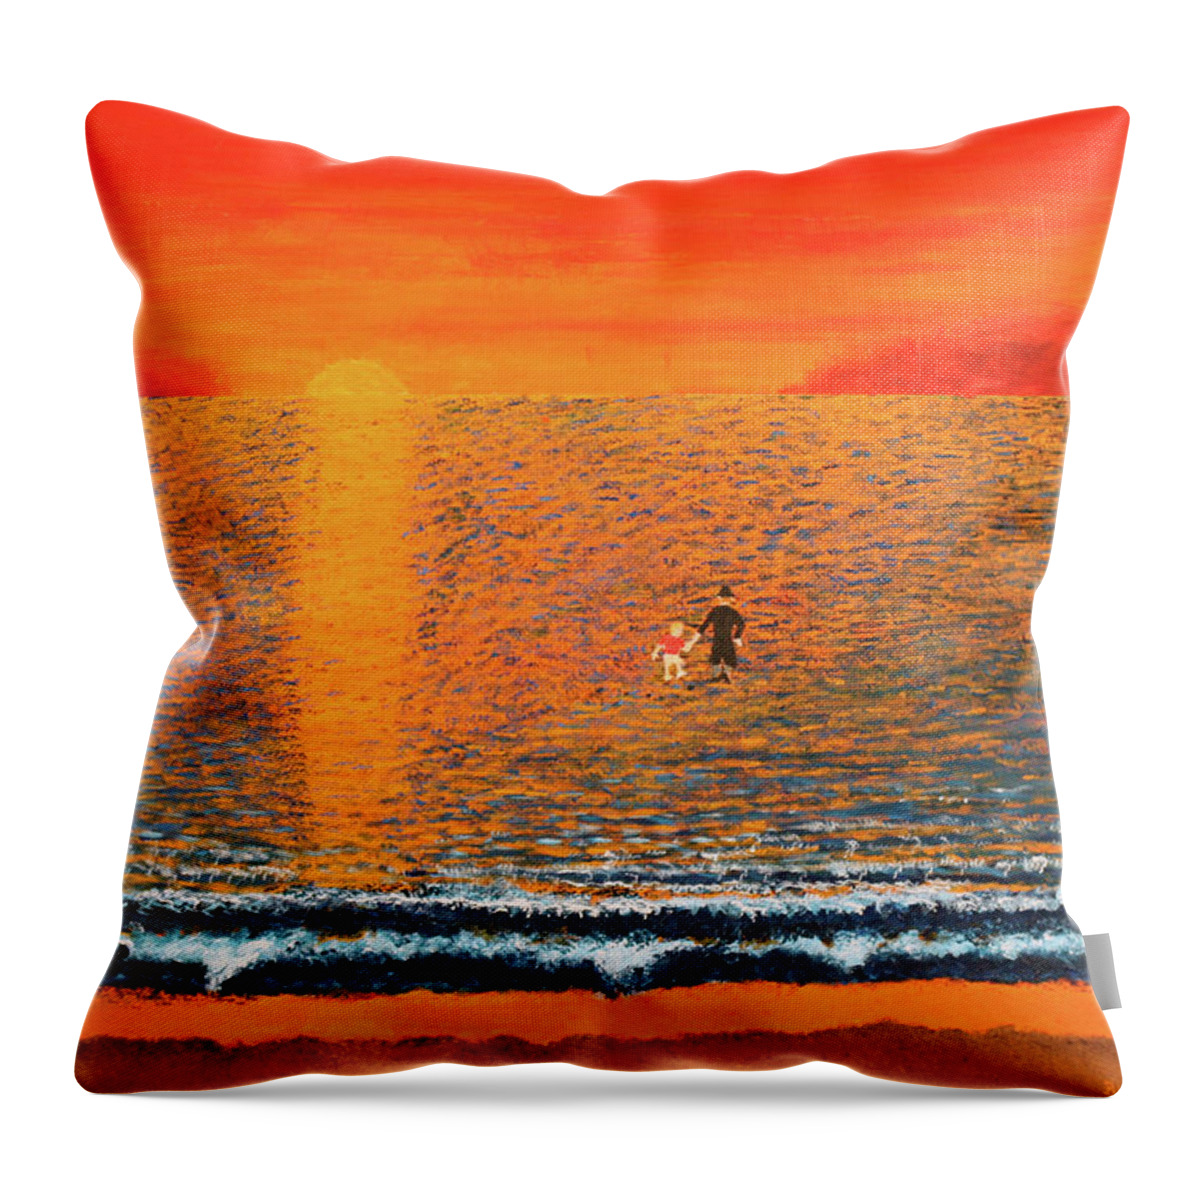 Modern Art Throw Pillow featuring the painting Crossing Over by Thomas Blood